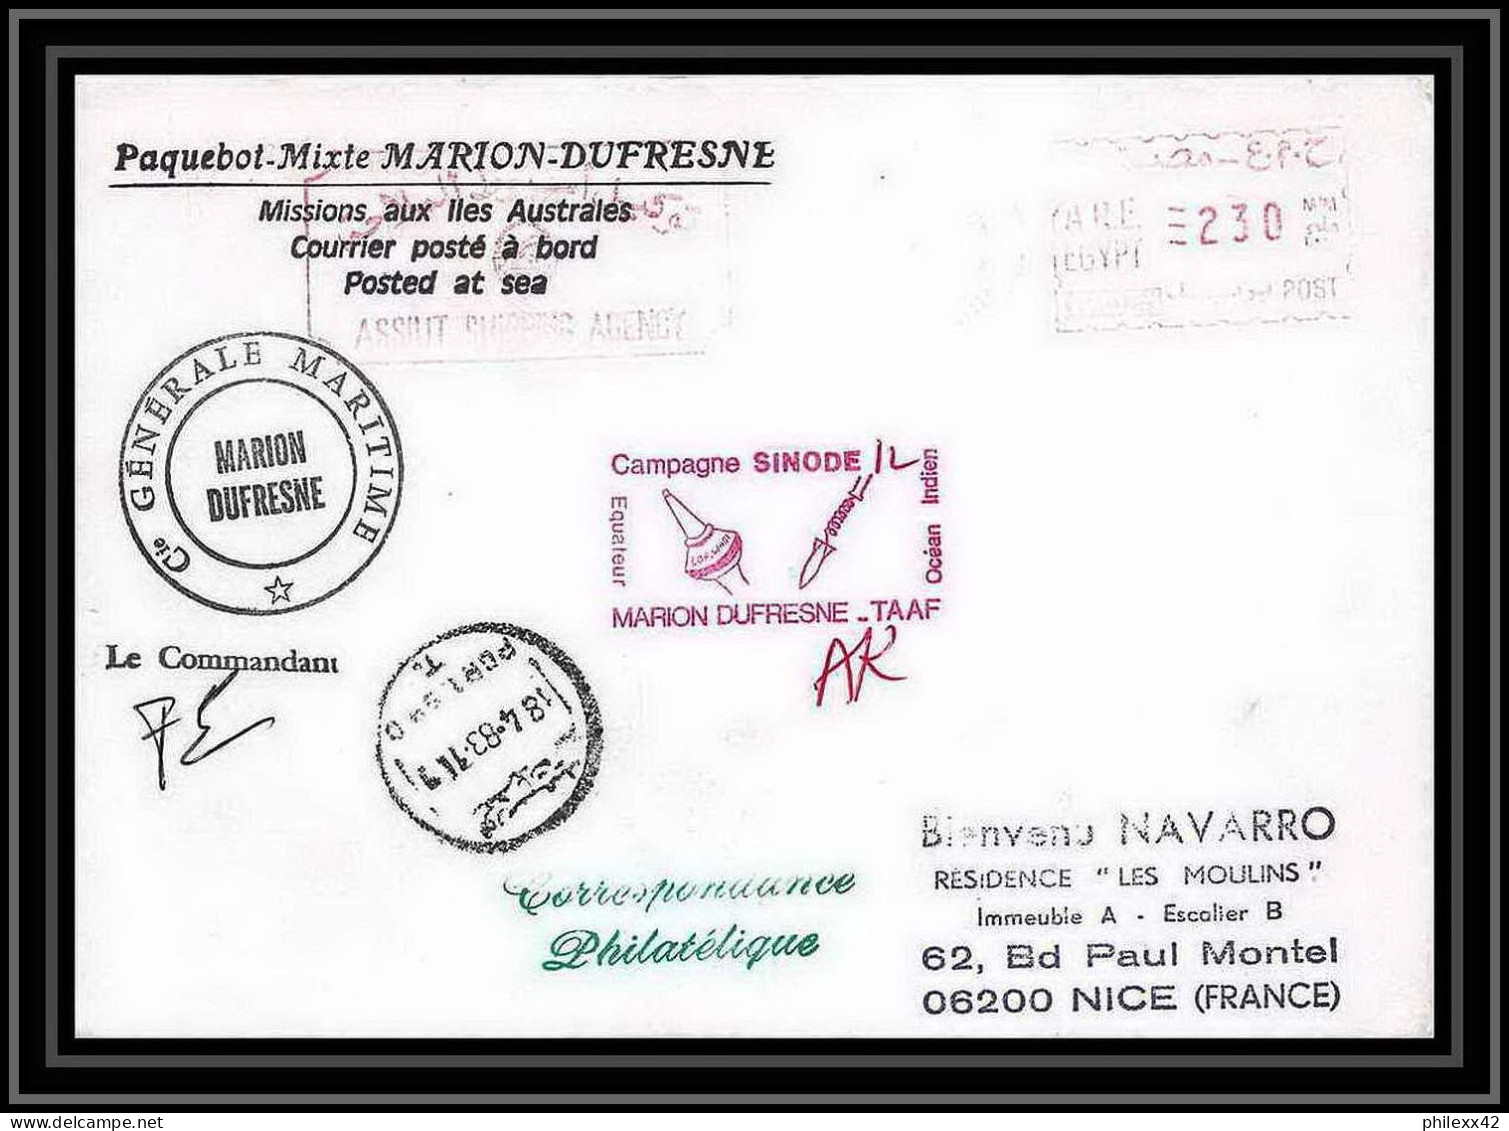 1394 Campagne Sinode 12 Signé Signed Marion Dufresne 18/4/1983 Egypt TAAF Antarctic Terres Australes Lettre (cover) - Spedizioni Antartiche